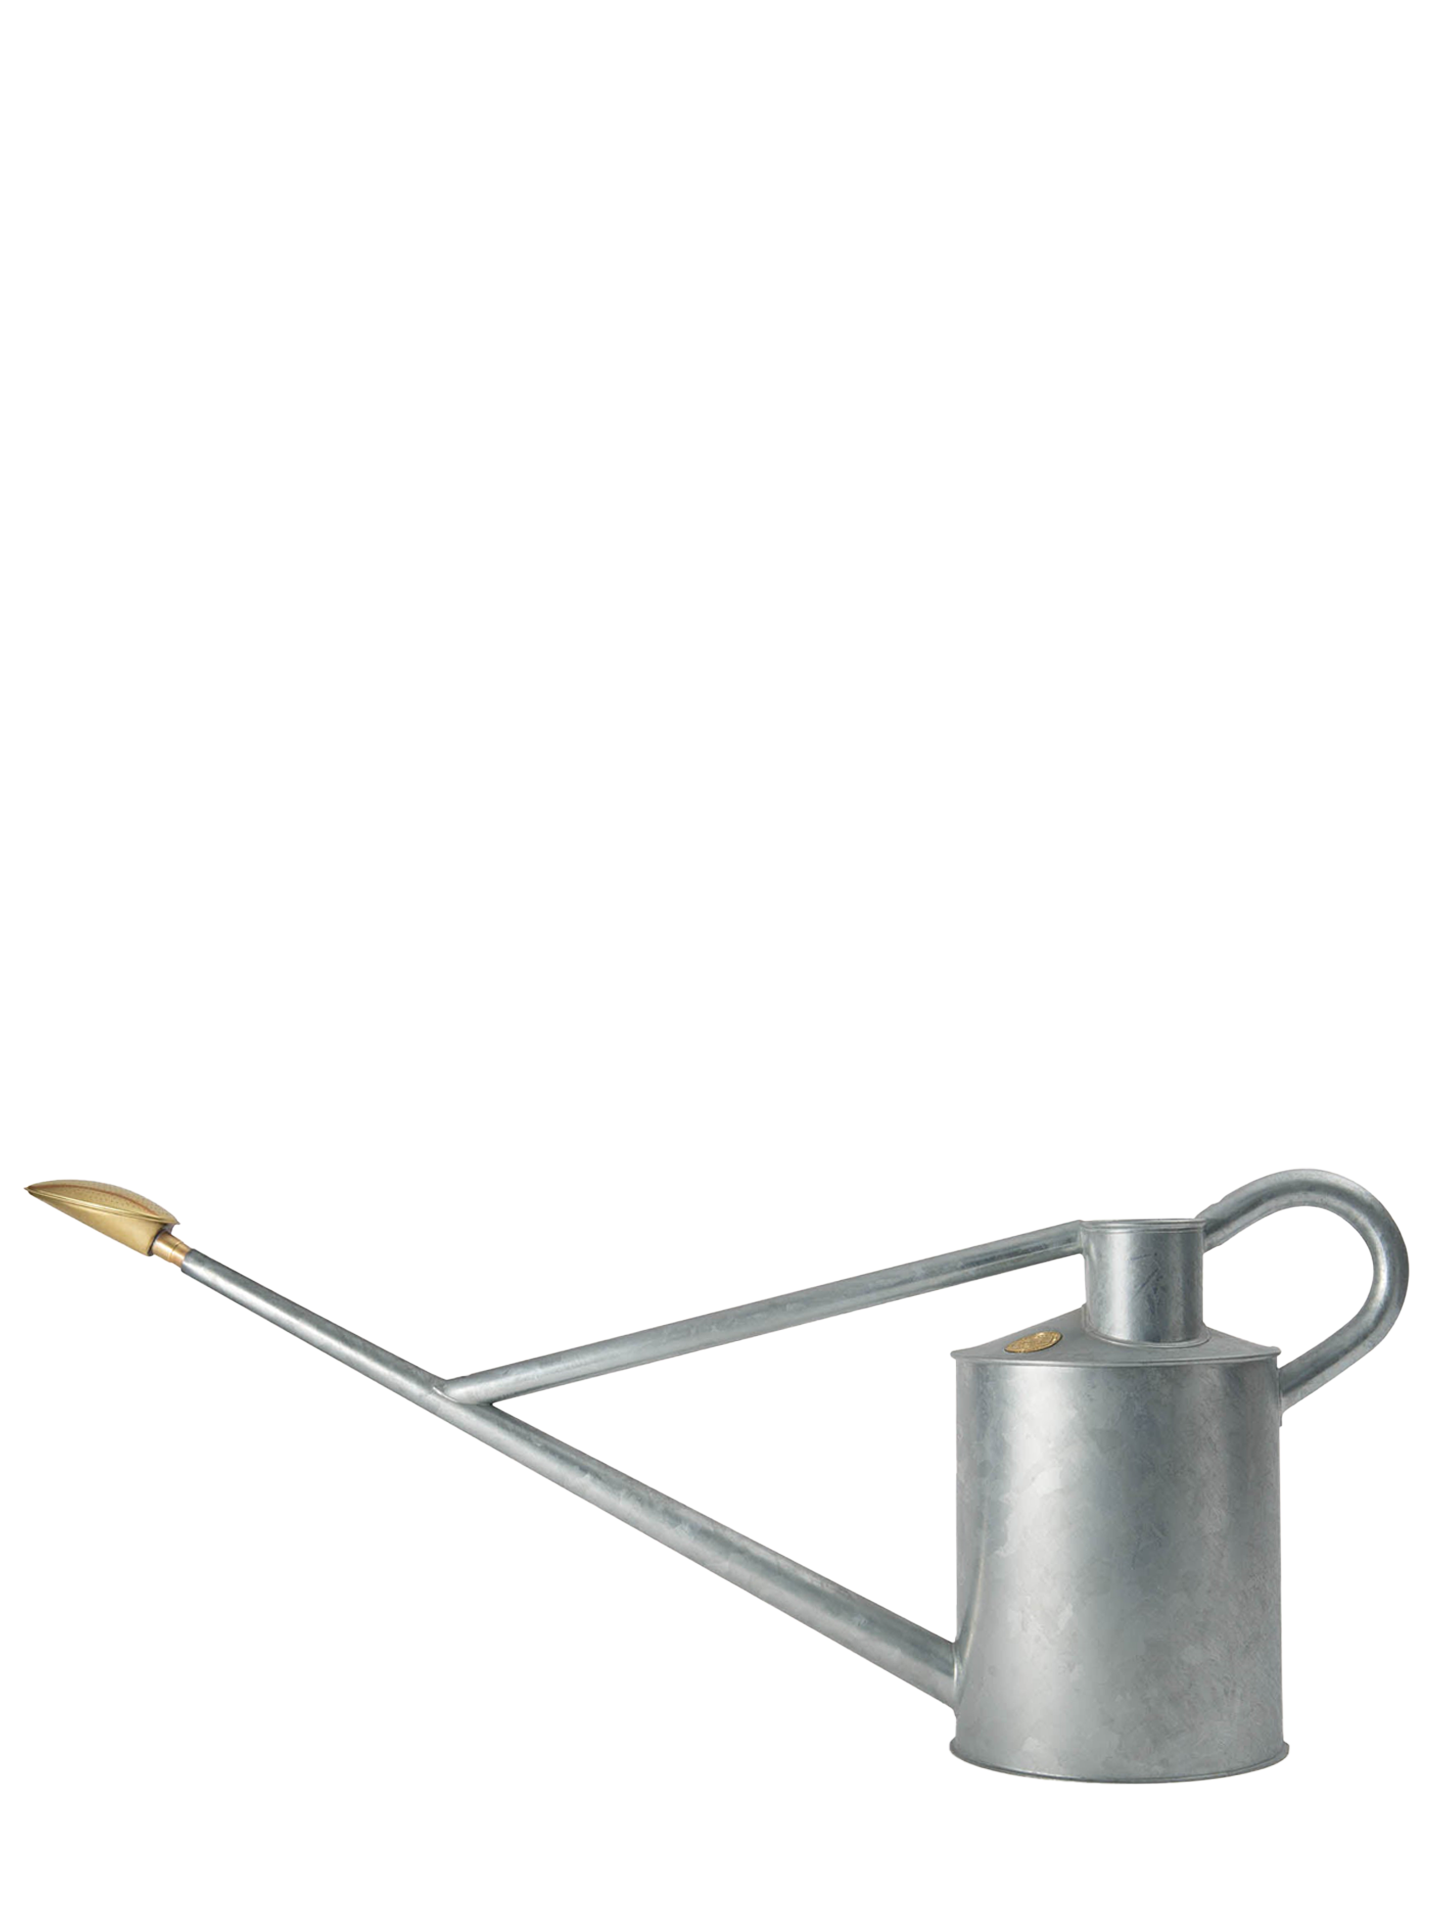 Galvanized Steel Warley Fall Watering Can 7.6 Litres